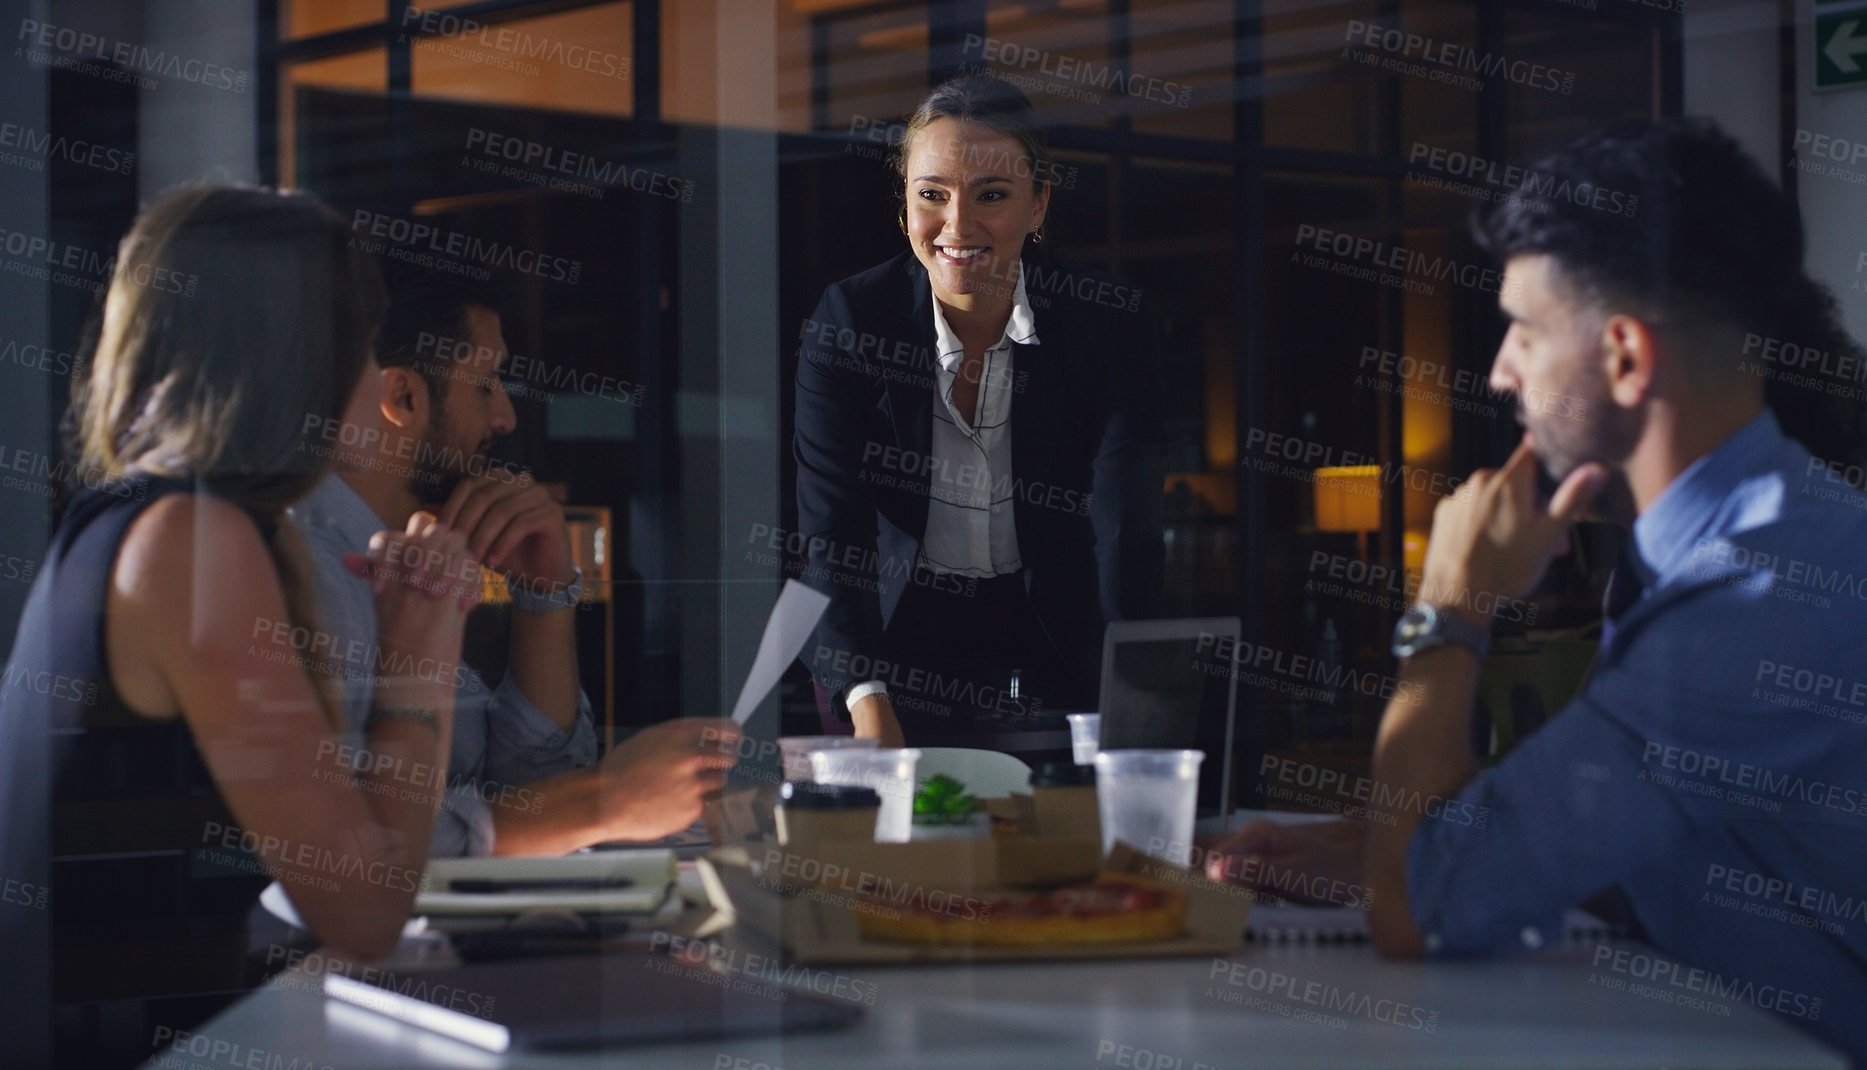 Buy stock photo Cropped shot of a diverse group of businesspeople sitting together and having a meeting in the office late at night